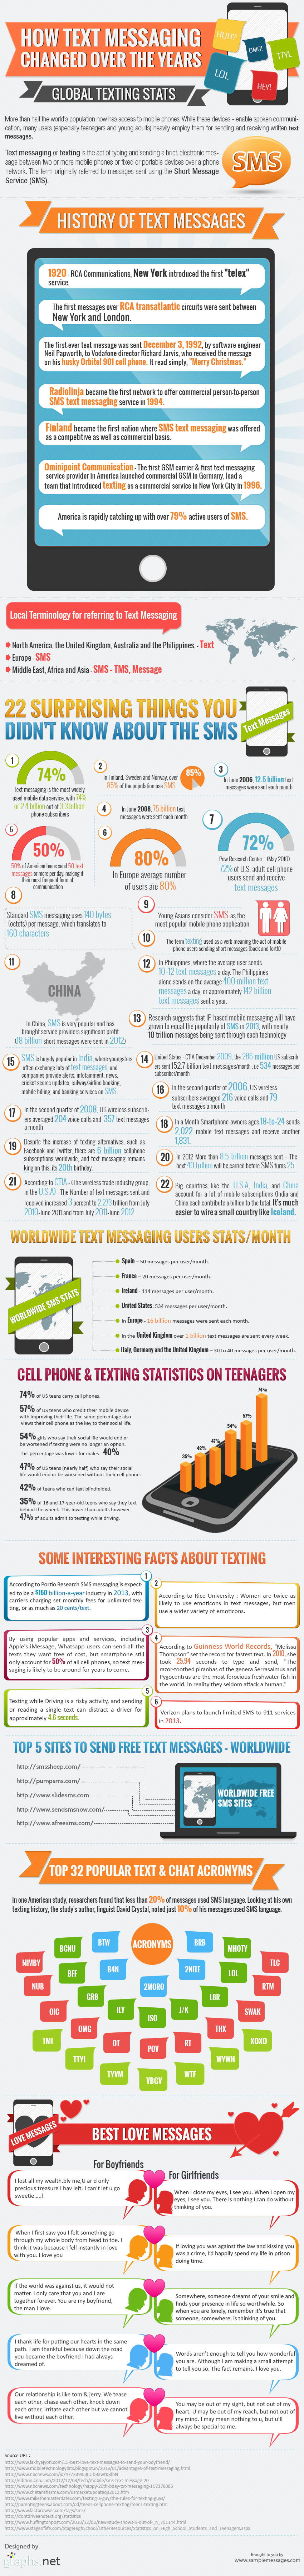 How Text Messaging Changed Over The Years